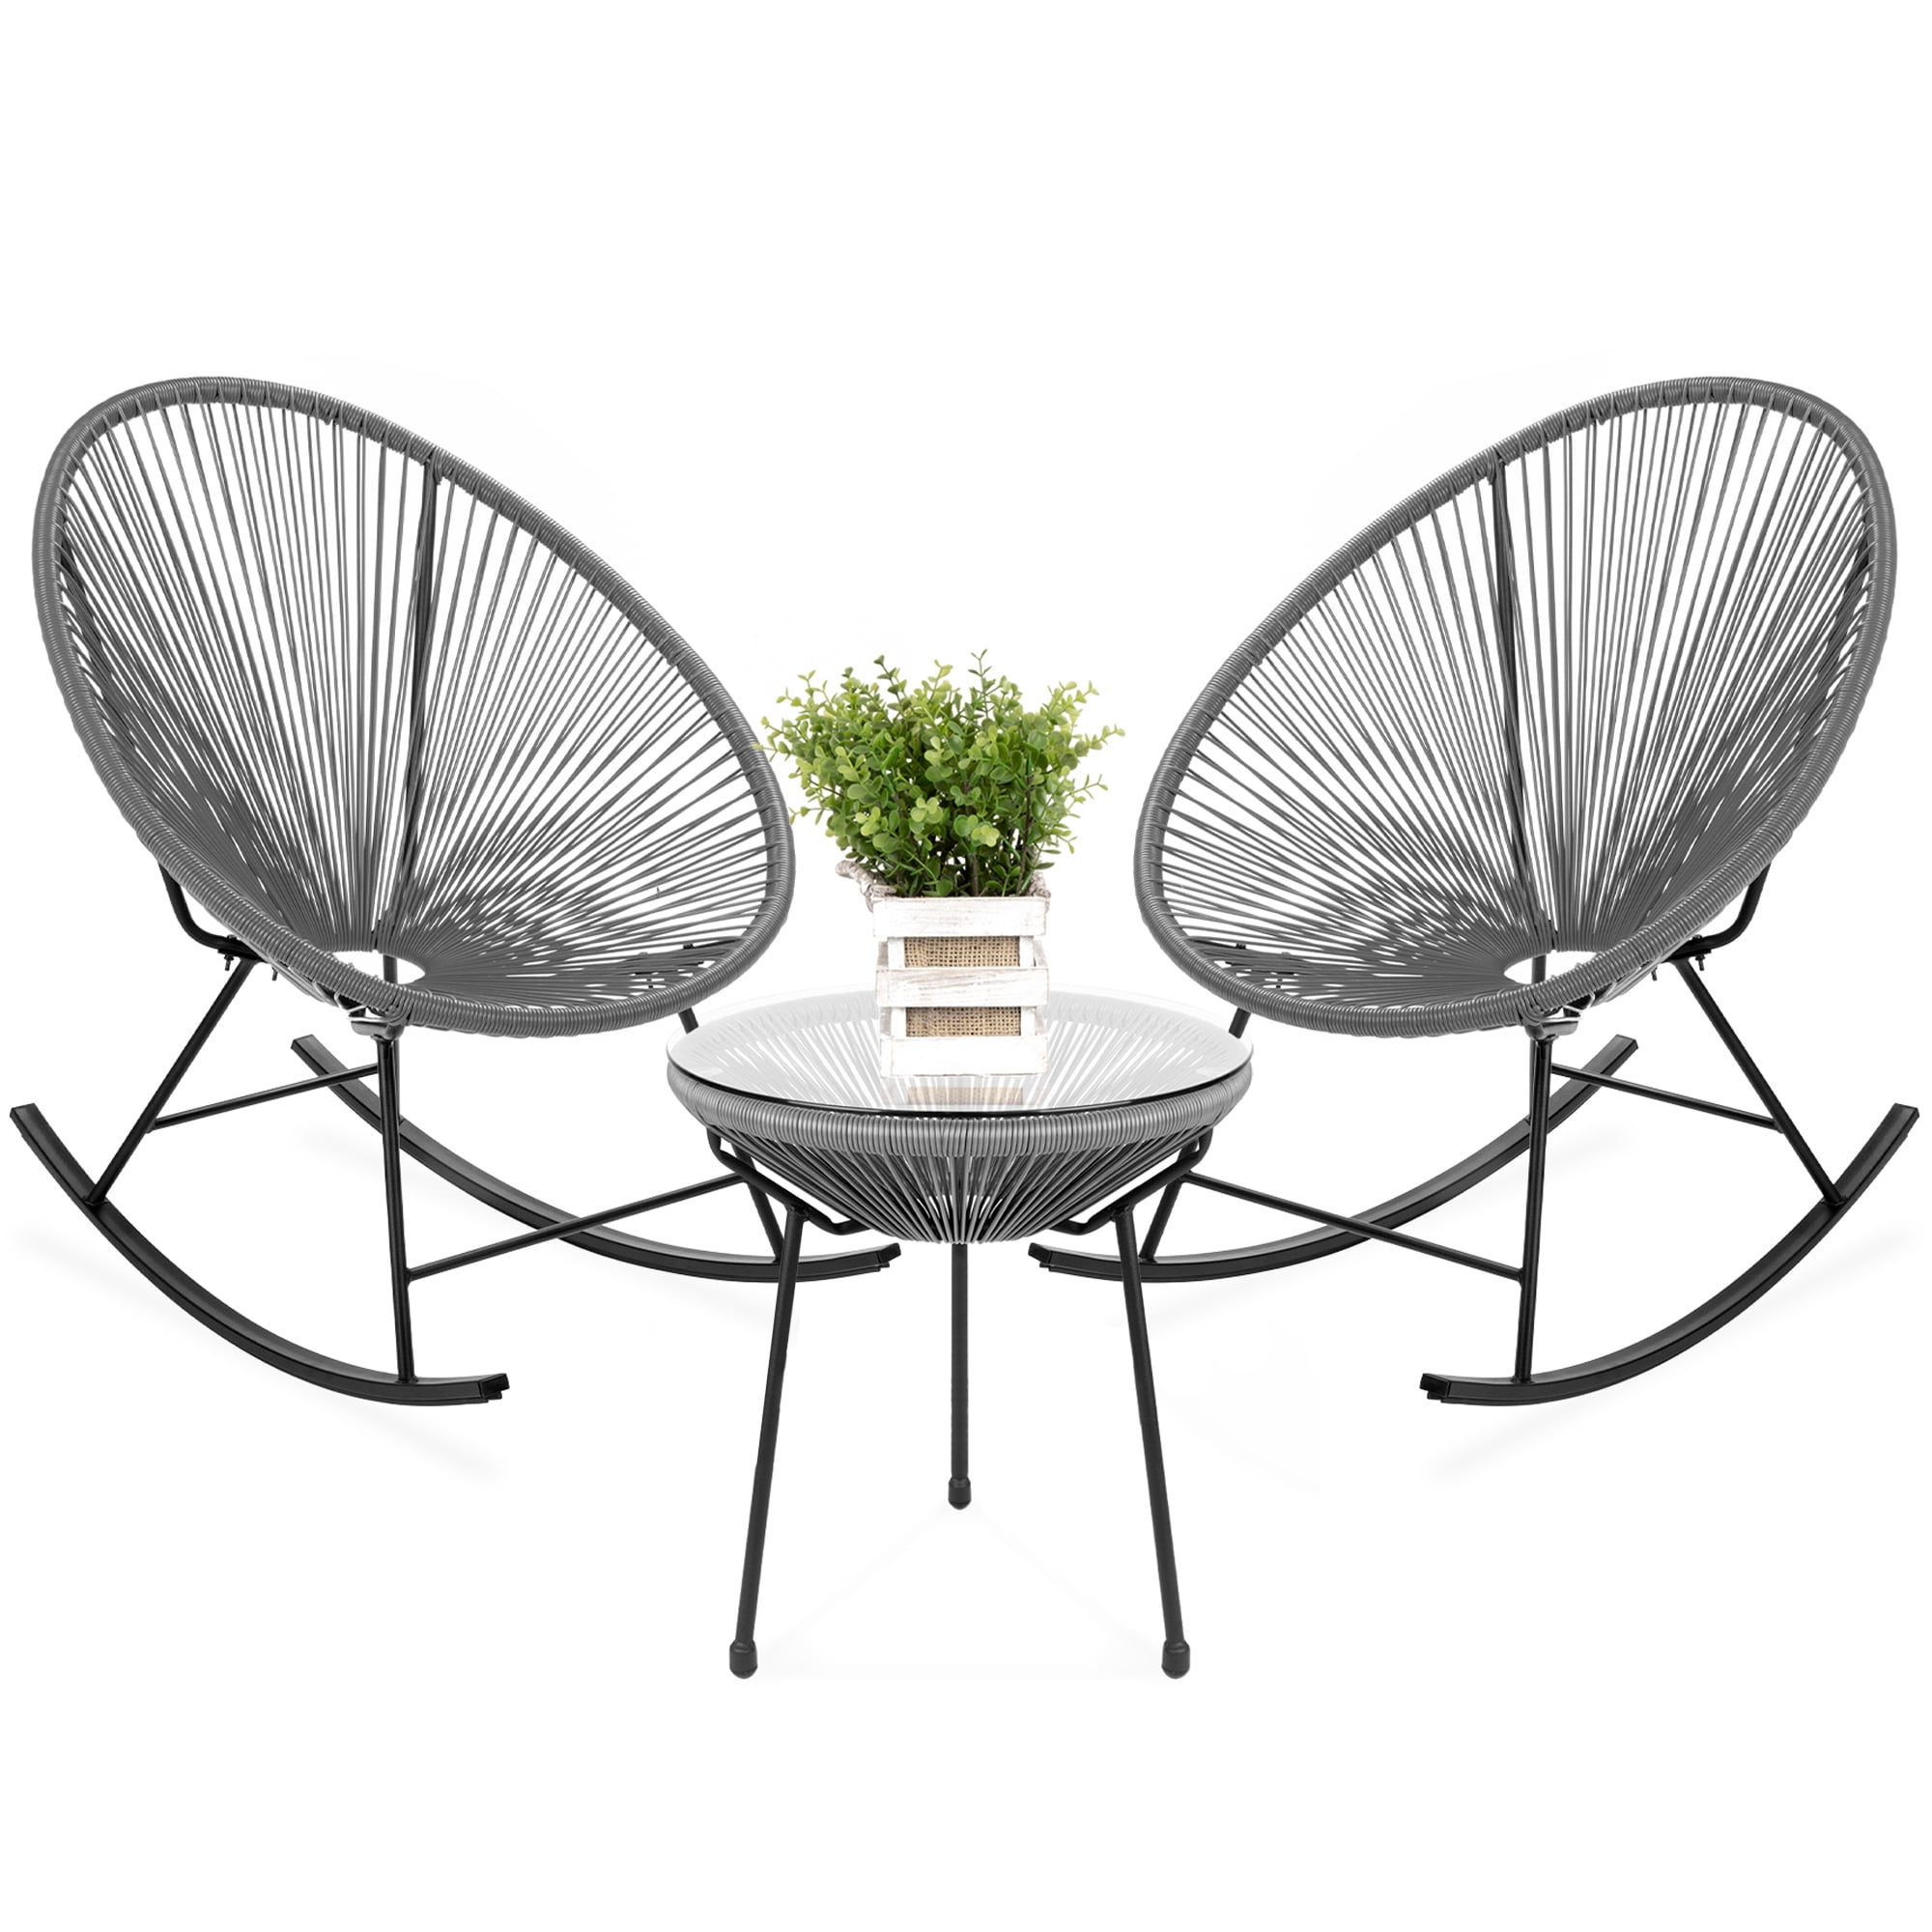 Best Choice Products 3-Piece All-Weather Patio Woven Rope Acapulco Bistro Furniture Set w/ Rocking Chairs, Table - Gray